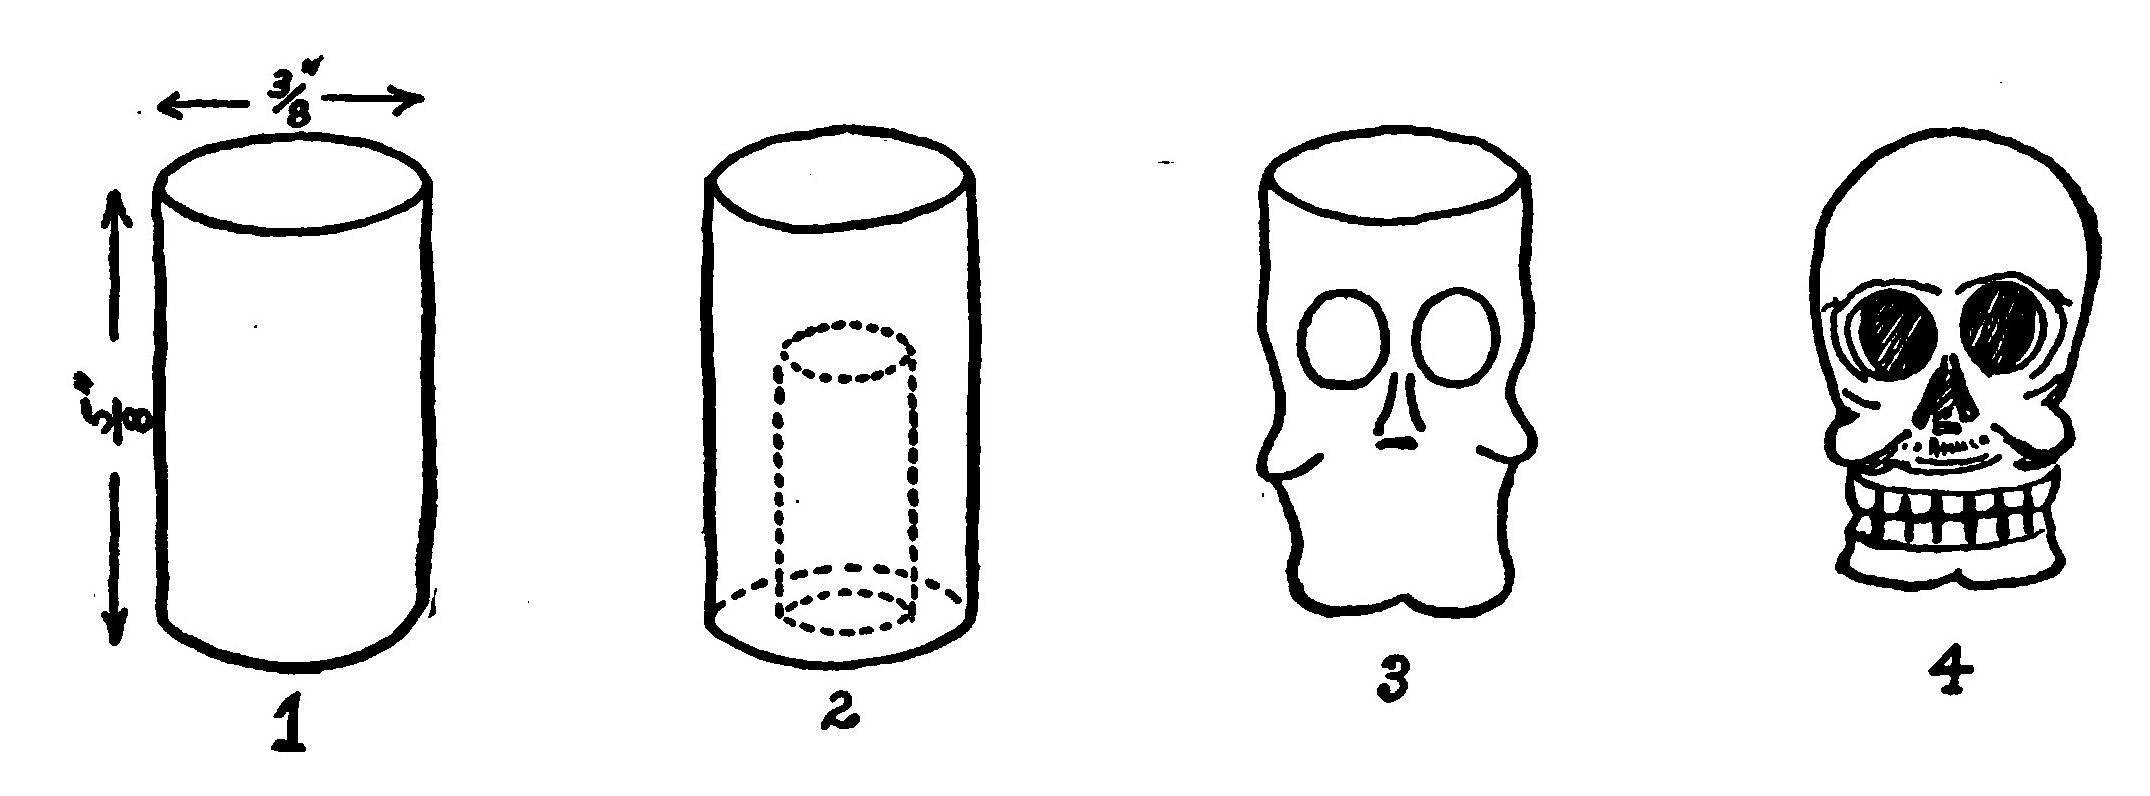 Fig. 301.—Four Steps in Carving a Skull Scarf-Pin. 1. The Bone. 2. Hole drilled in Base. 3. Roughed out. 4. Finished.